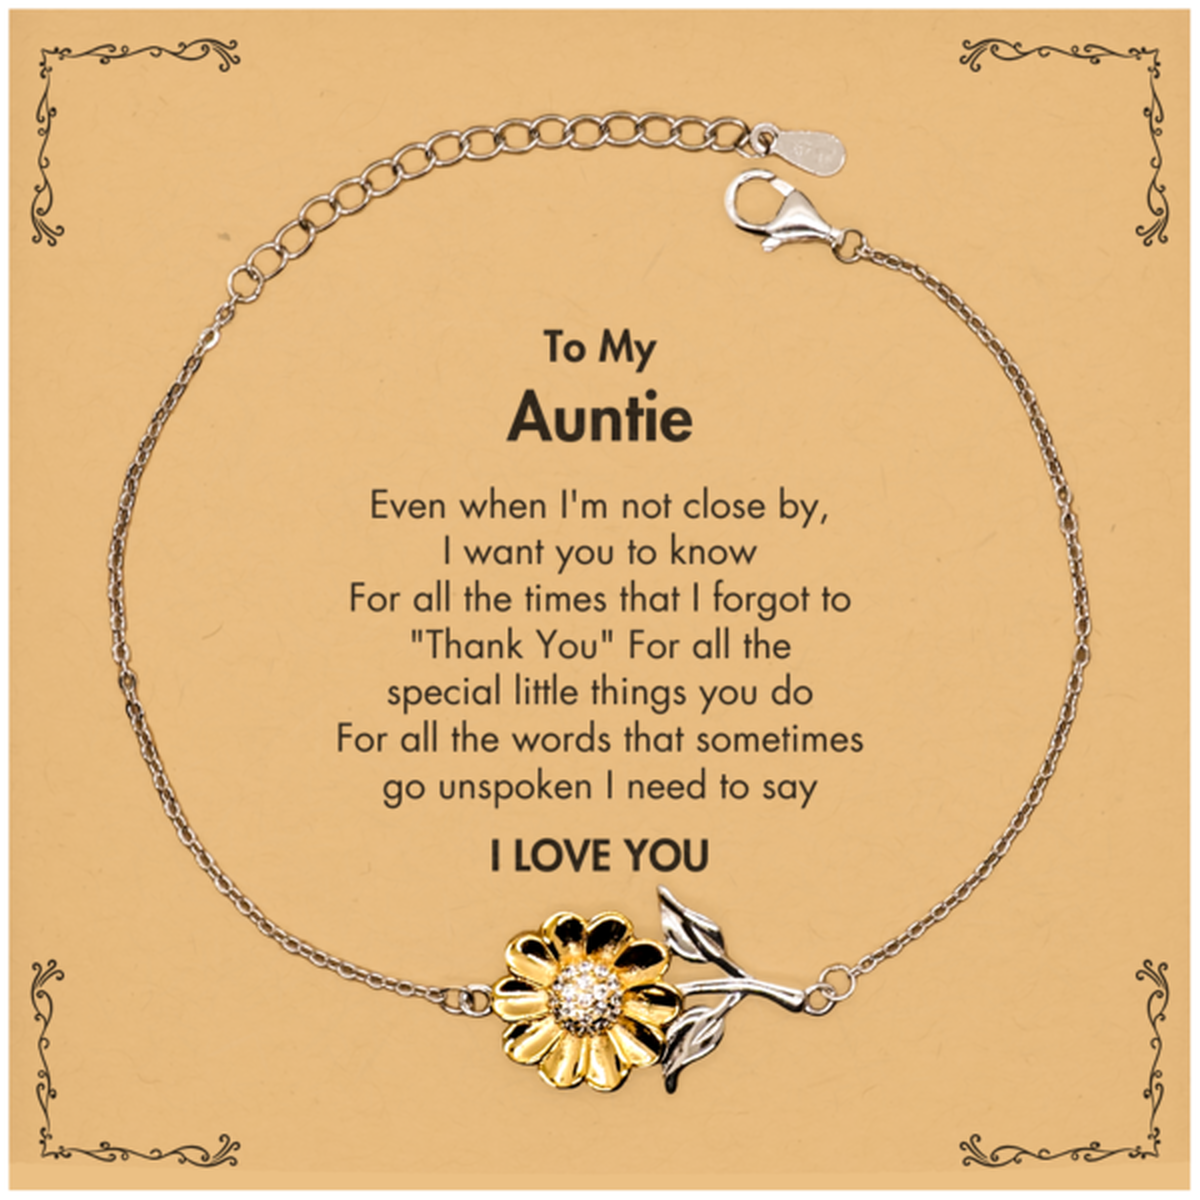 Thank You Gifts for Auntie, Keepsake Sunflower Bracelet Gifts for Auntie Birthday Mother's day Father's Day Auntie For all the words That sometimes go unspoken I need to say I LOVE YOU